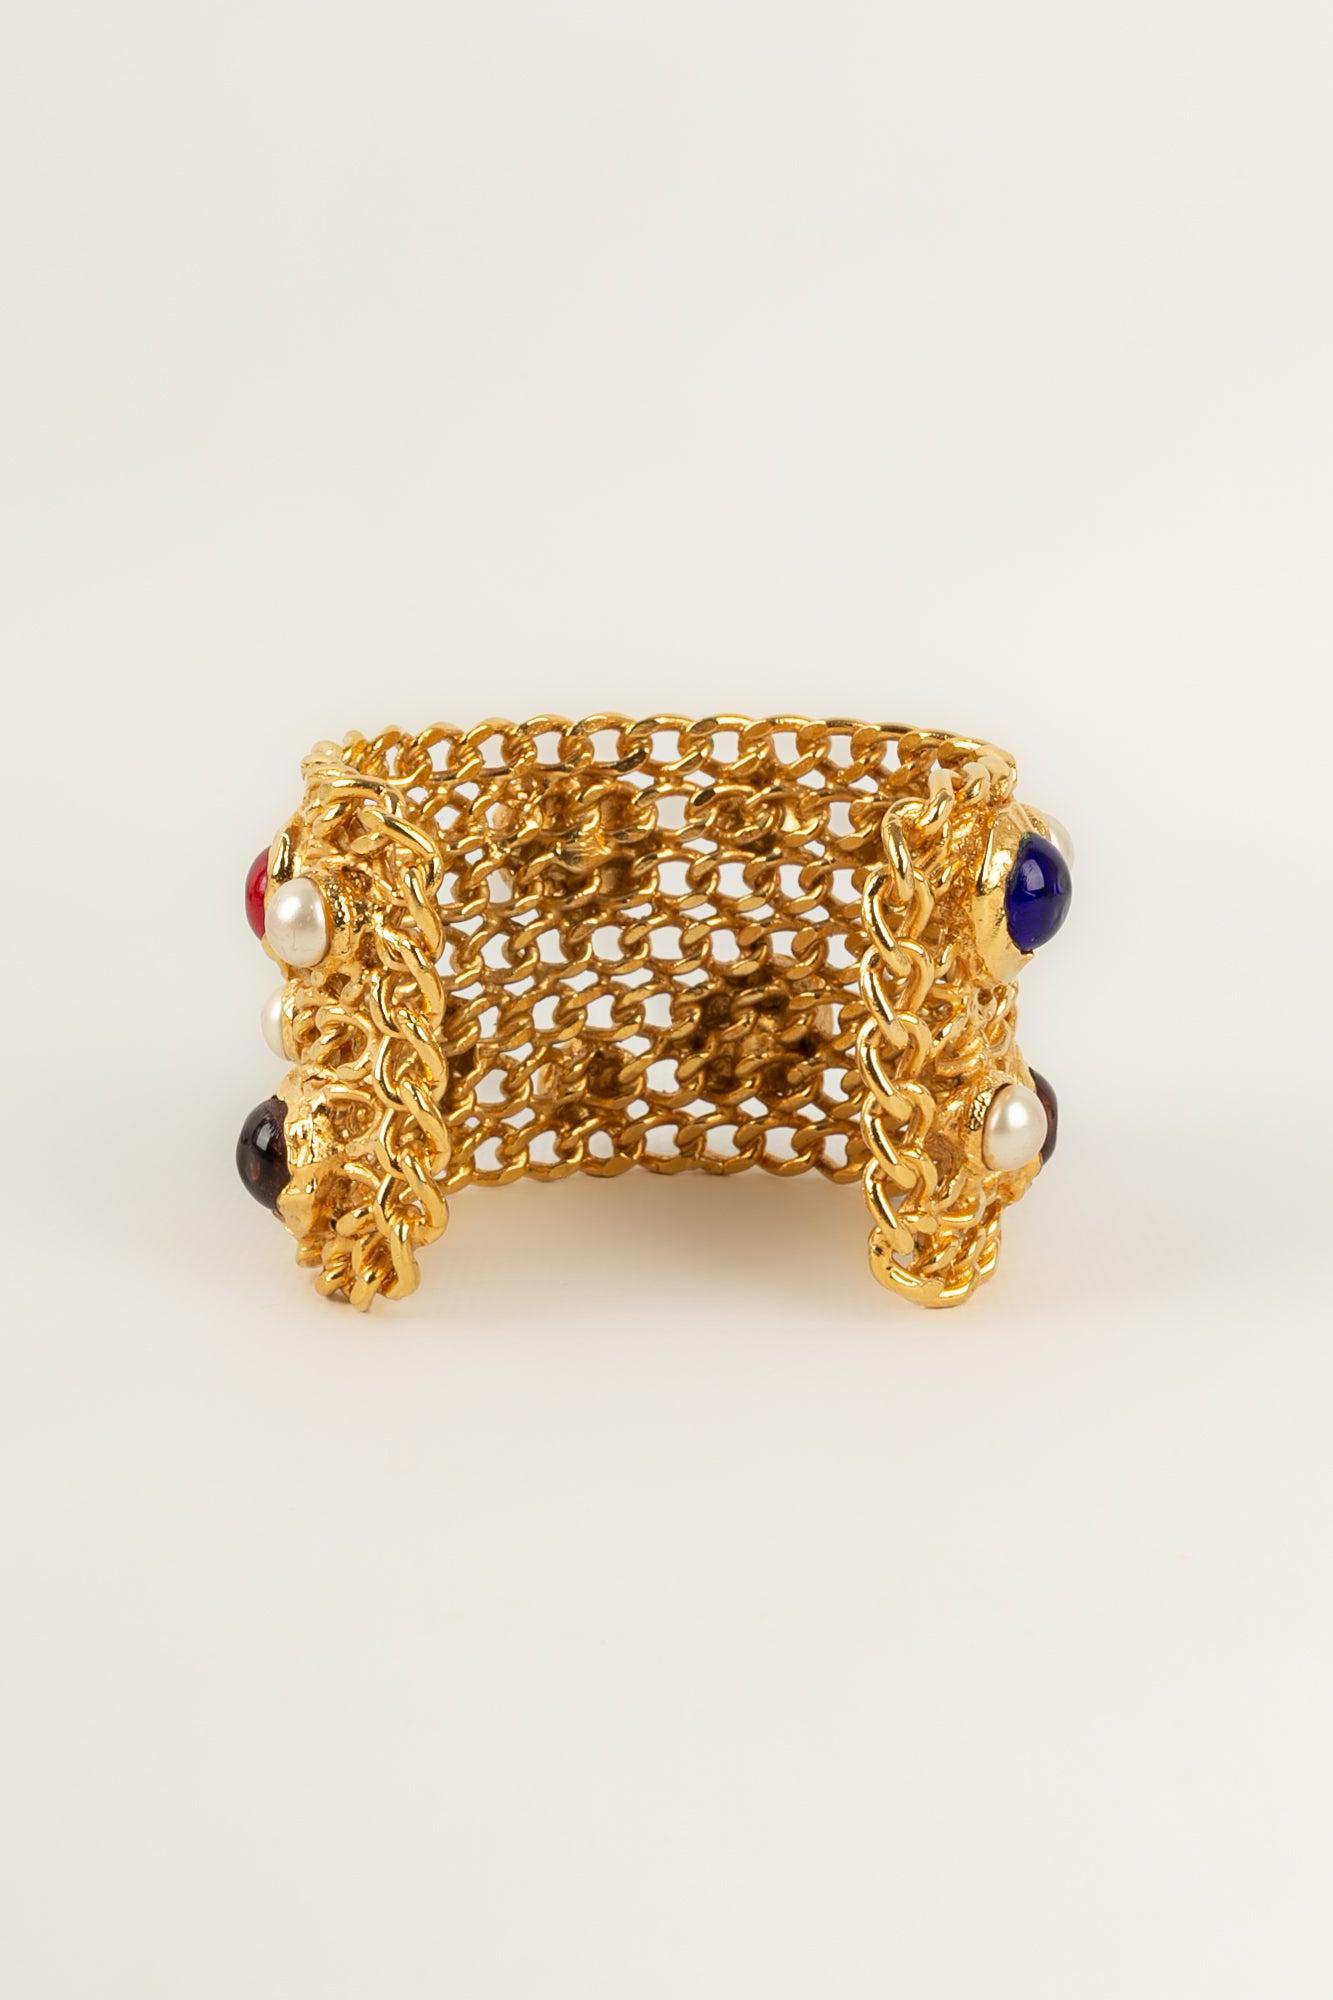 Women's Chanel Cuff Bracelet in Golden Metal with Cabochons For Sale